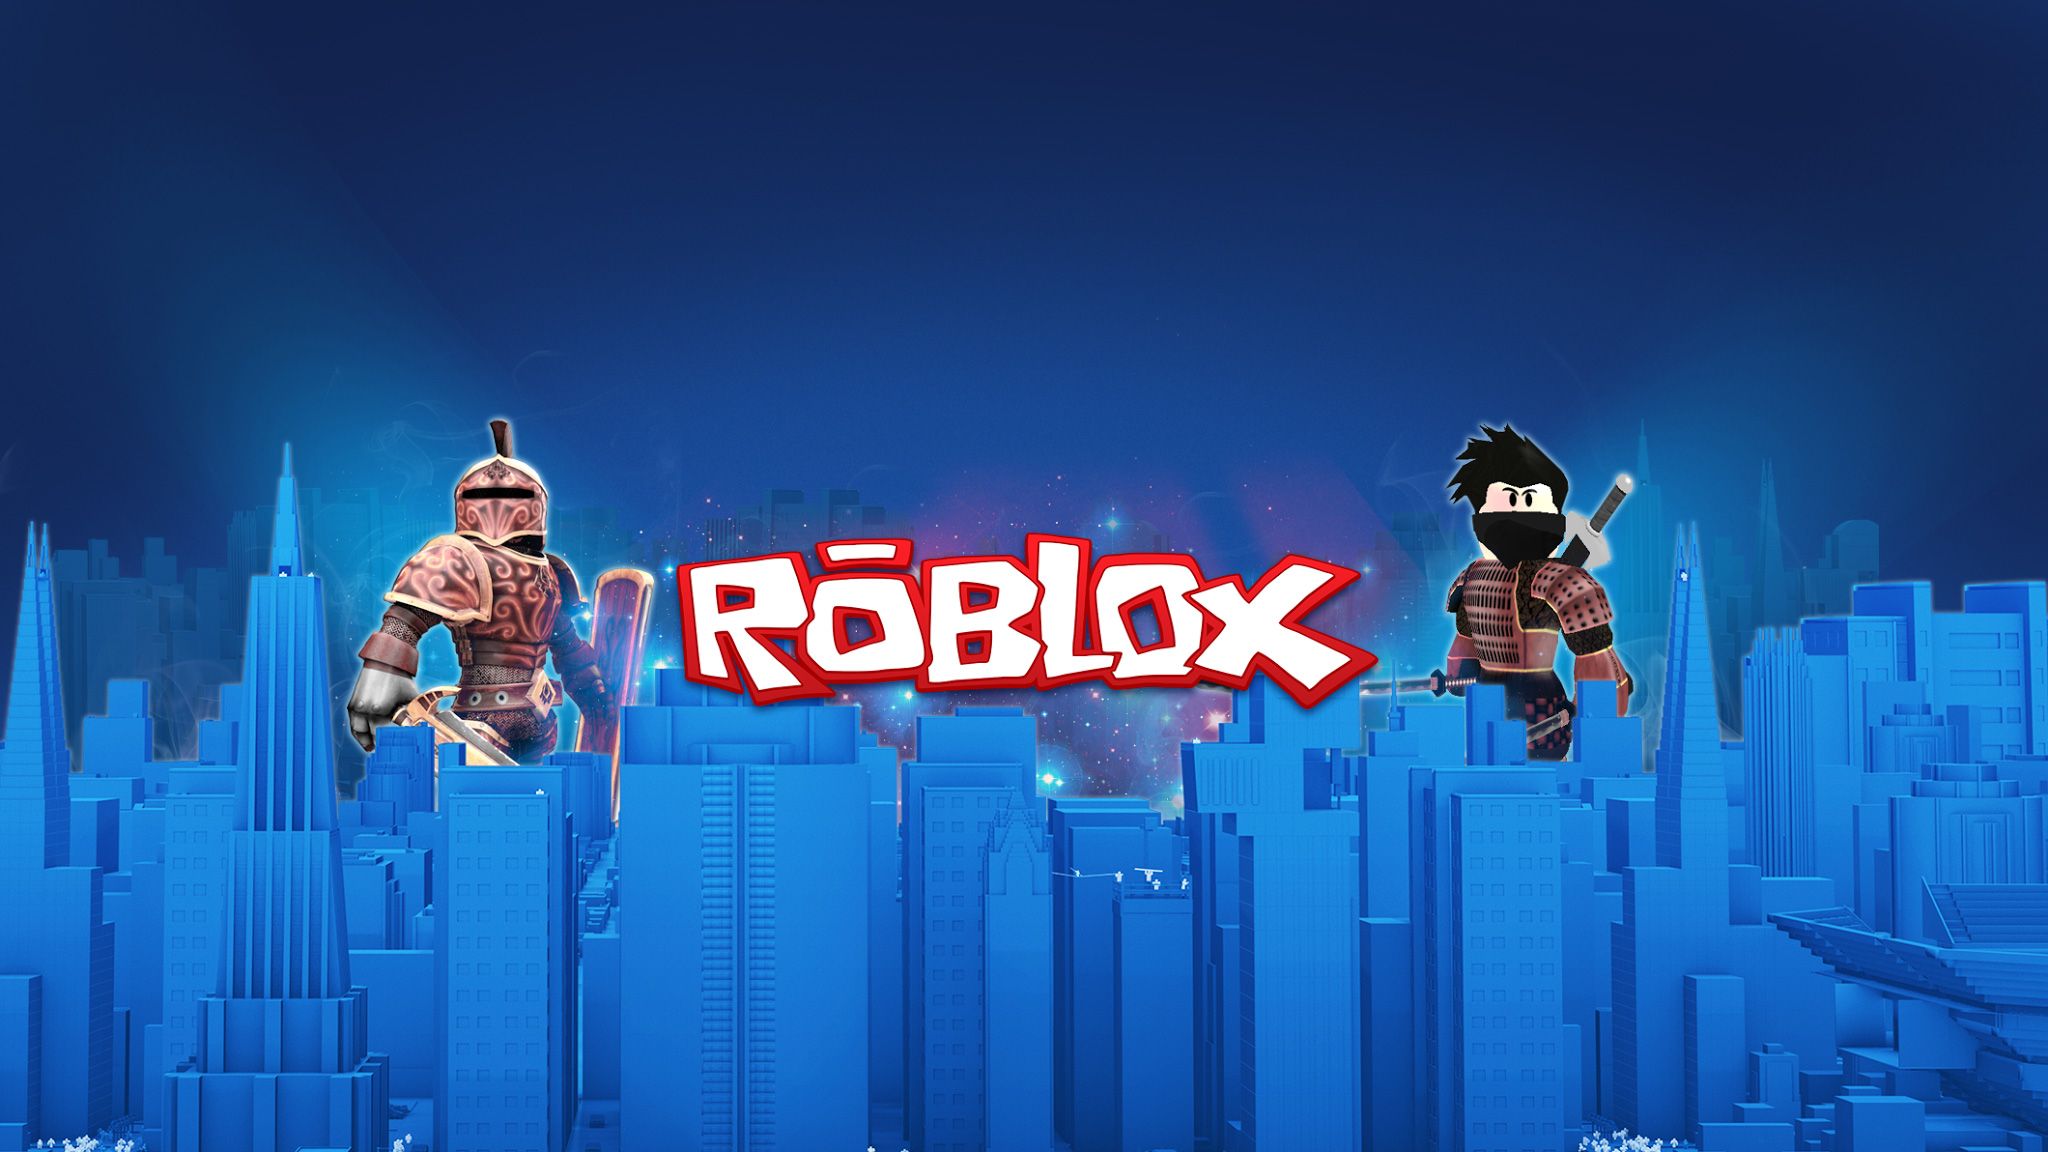 X 上的TC builds：「Another simple wallpaper for roblox players #robloxart # Roblox #wallpaper  / X